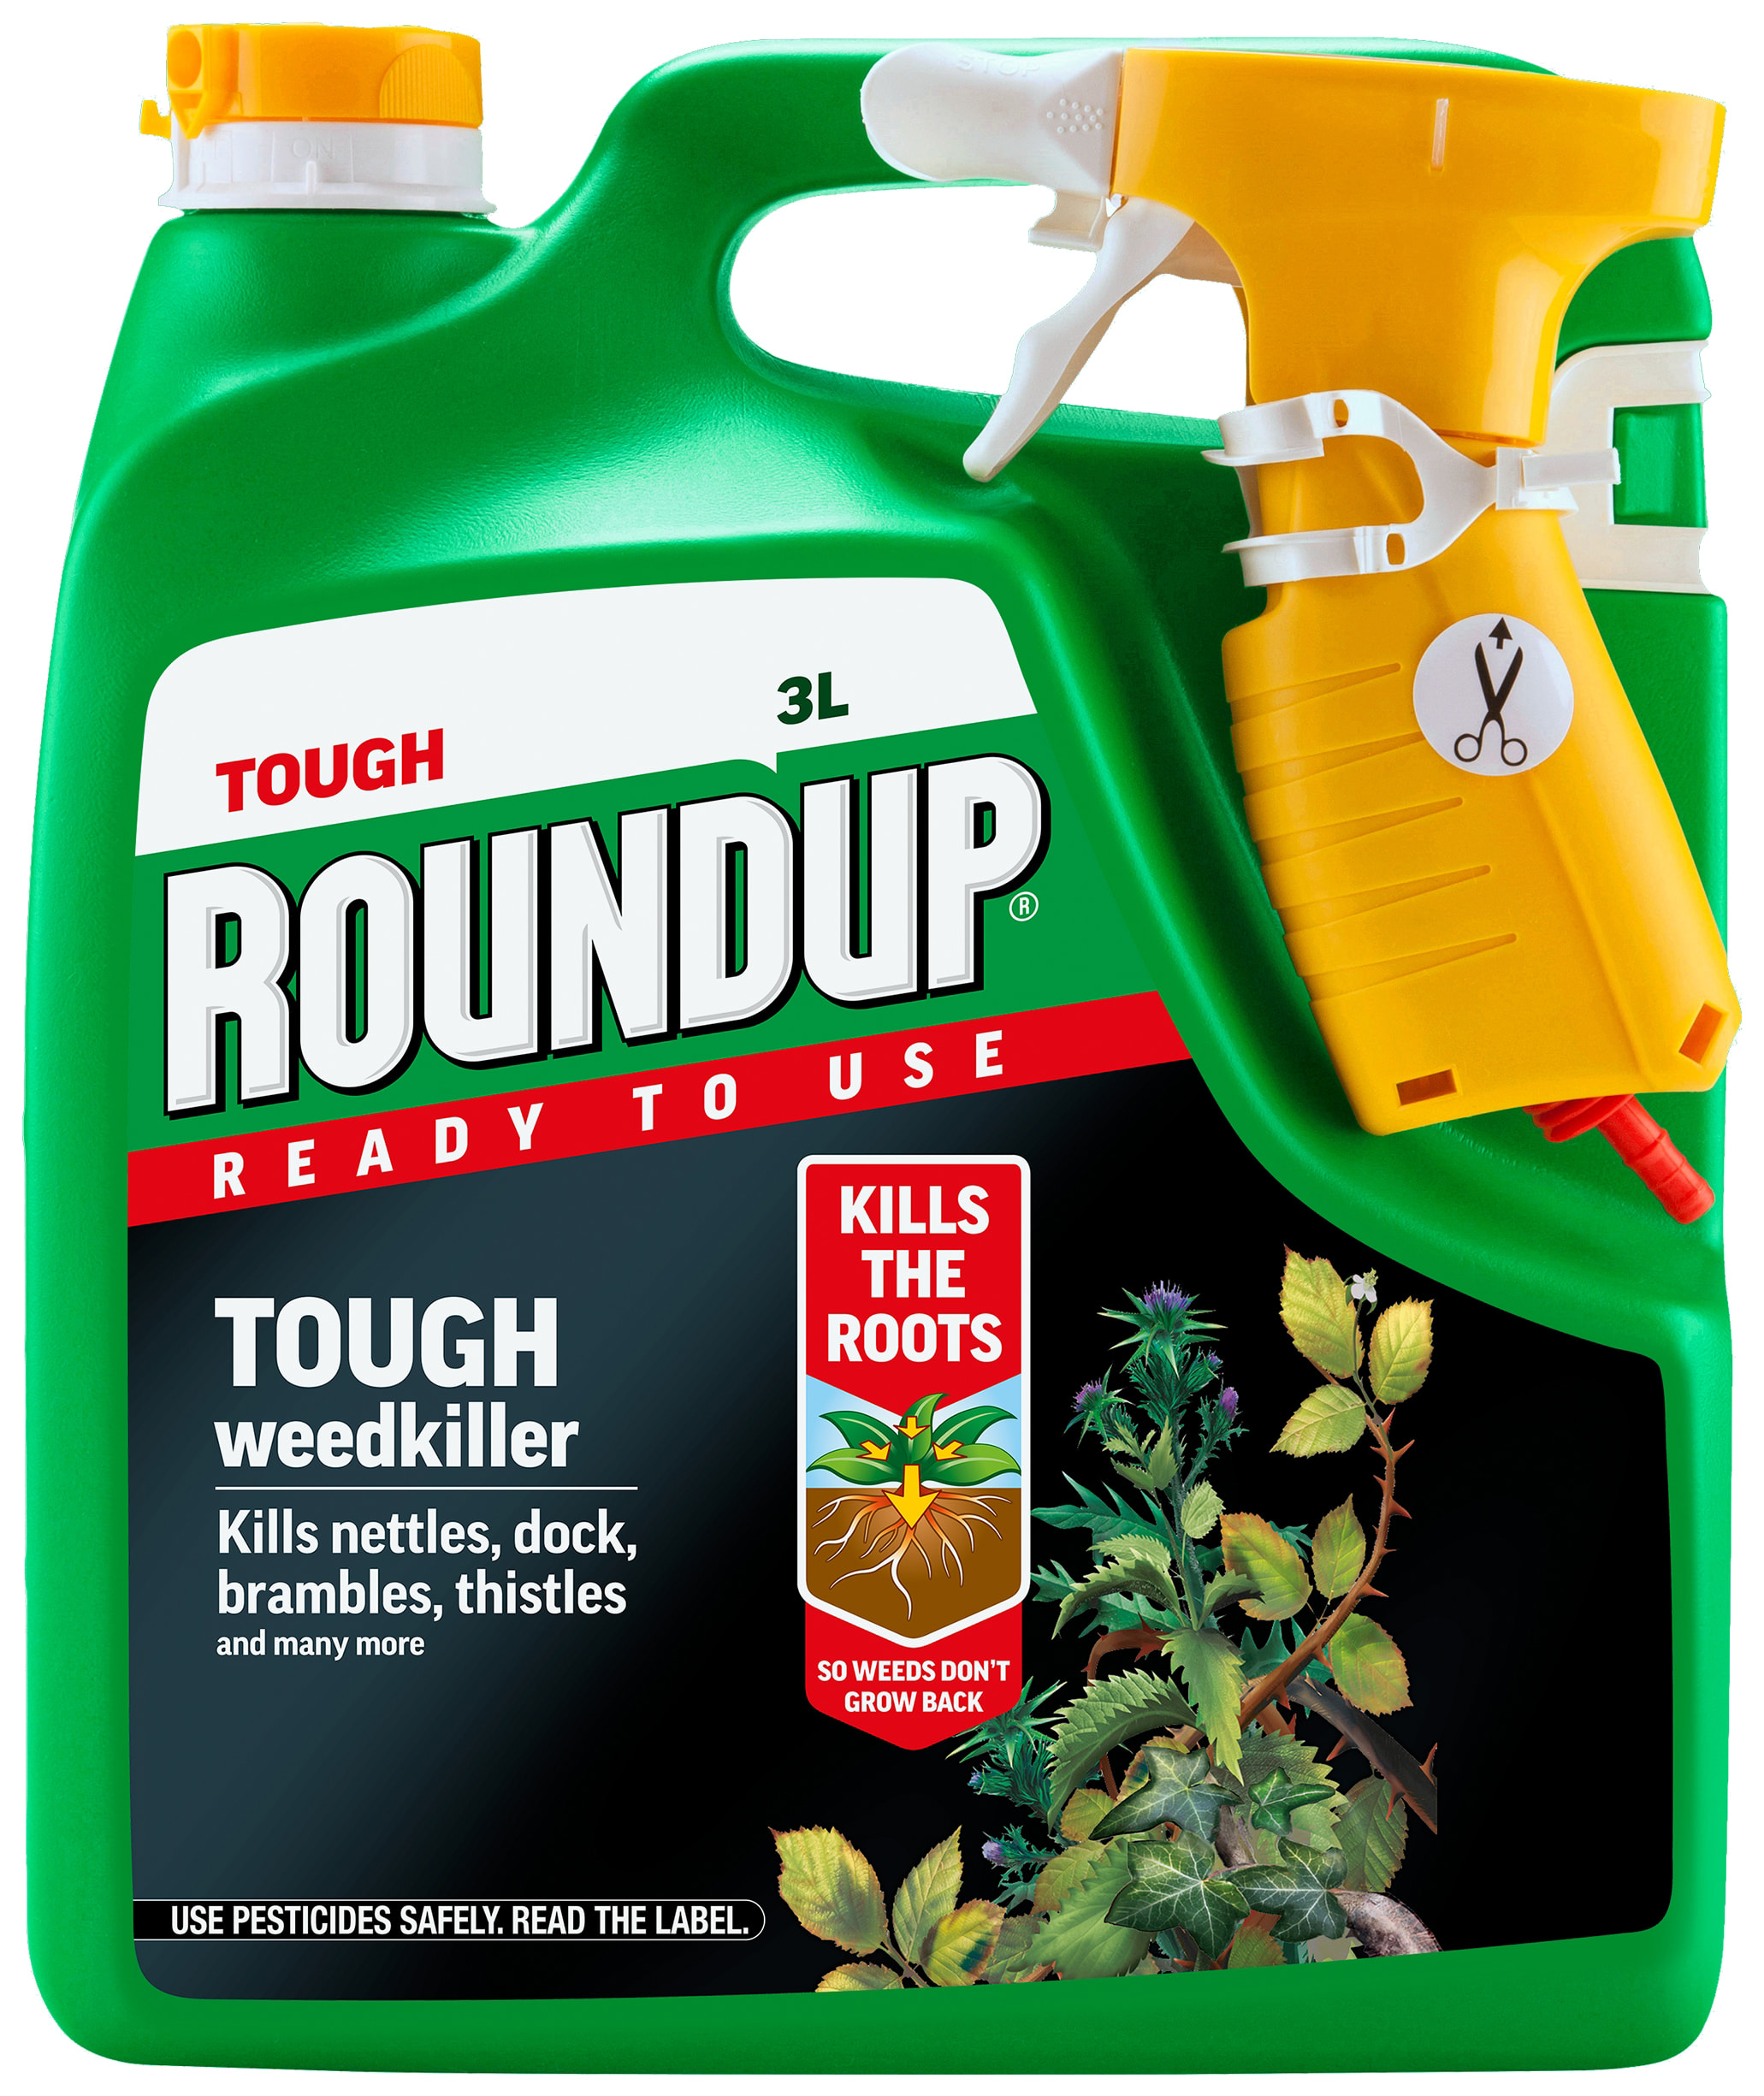 Roundup Ready to Use Tough Weed Killer -